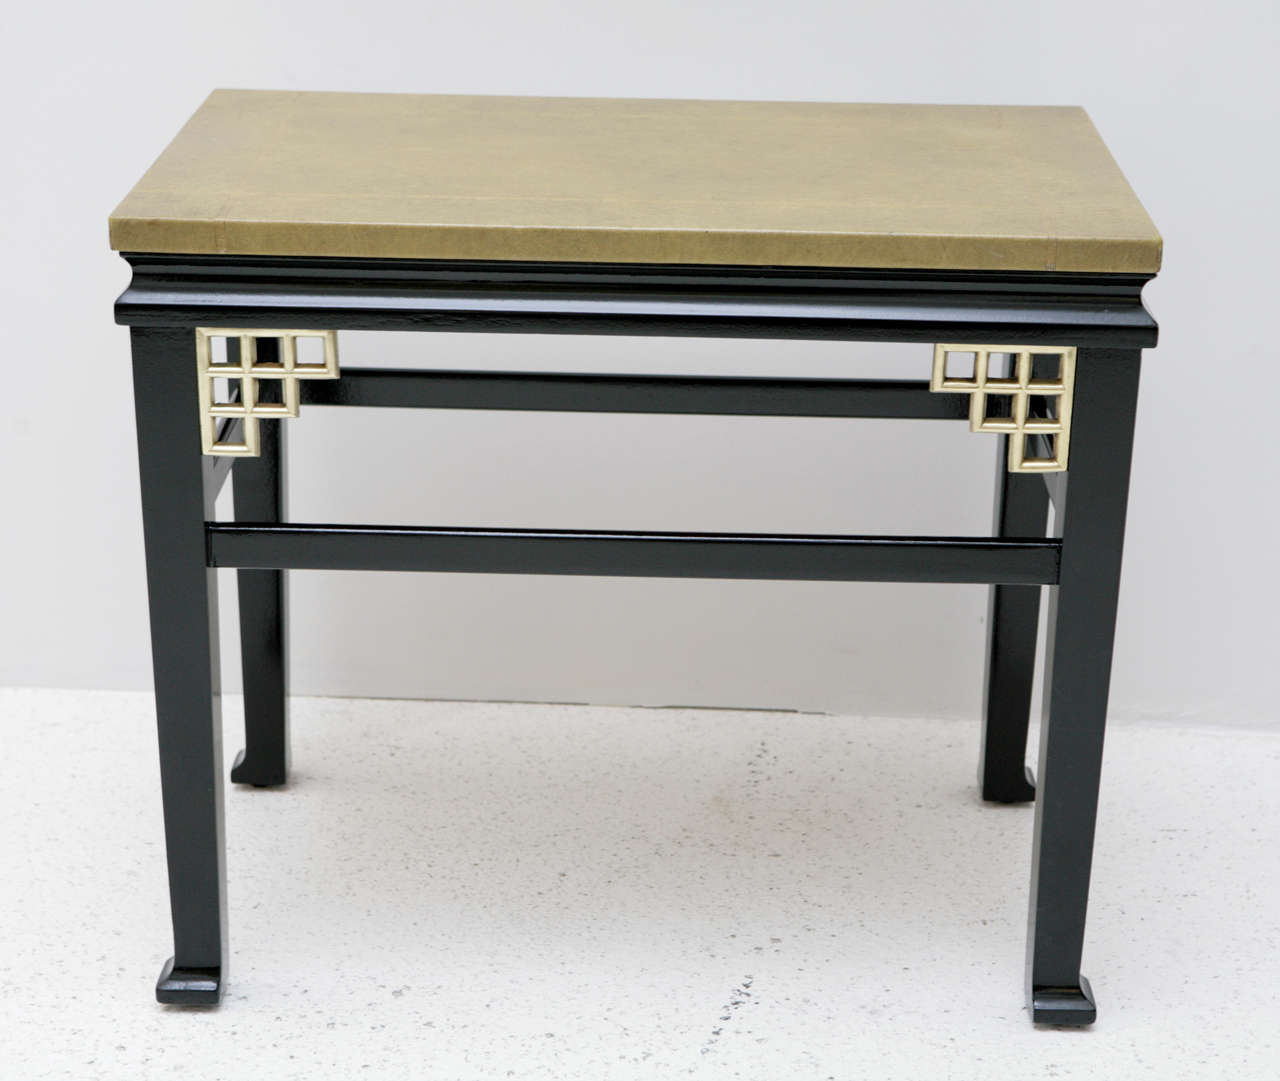 A pair of custom side tables with gold greek key embossed leather tops and satin finished black bases accented with brass fretwork details in the corners.
These tables are most certainly custom work based on the construction and quality, it is